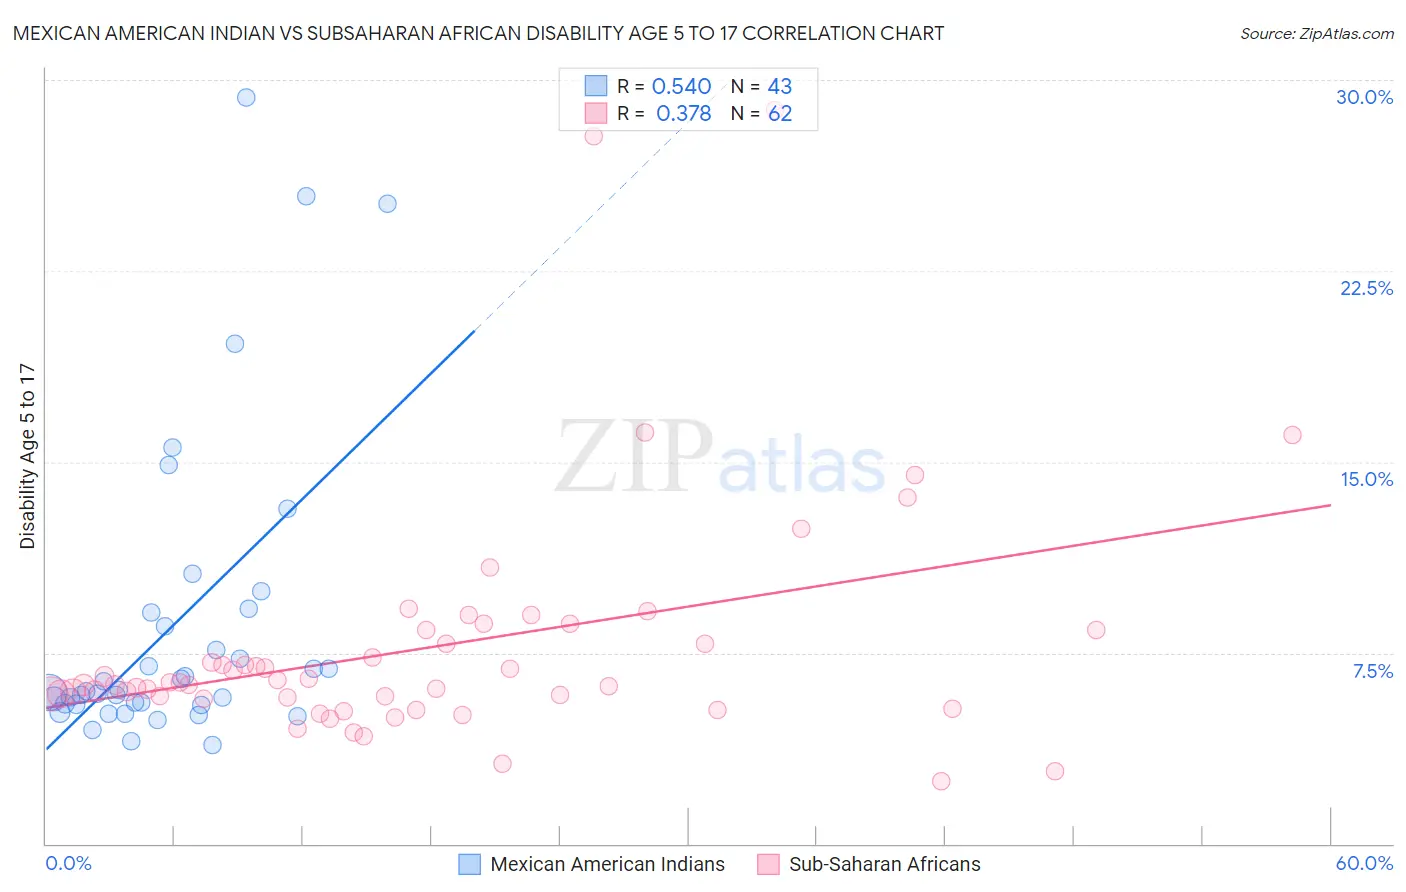 Mexican American Indian vs Subsaharan African Disability Age 5 to 17